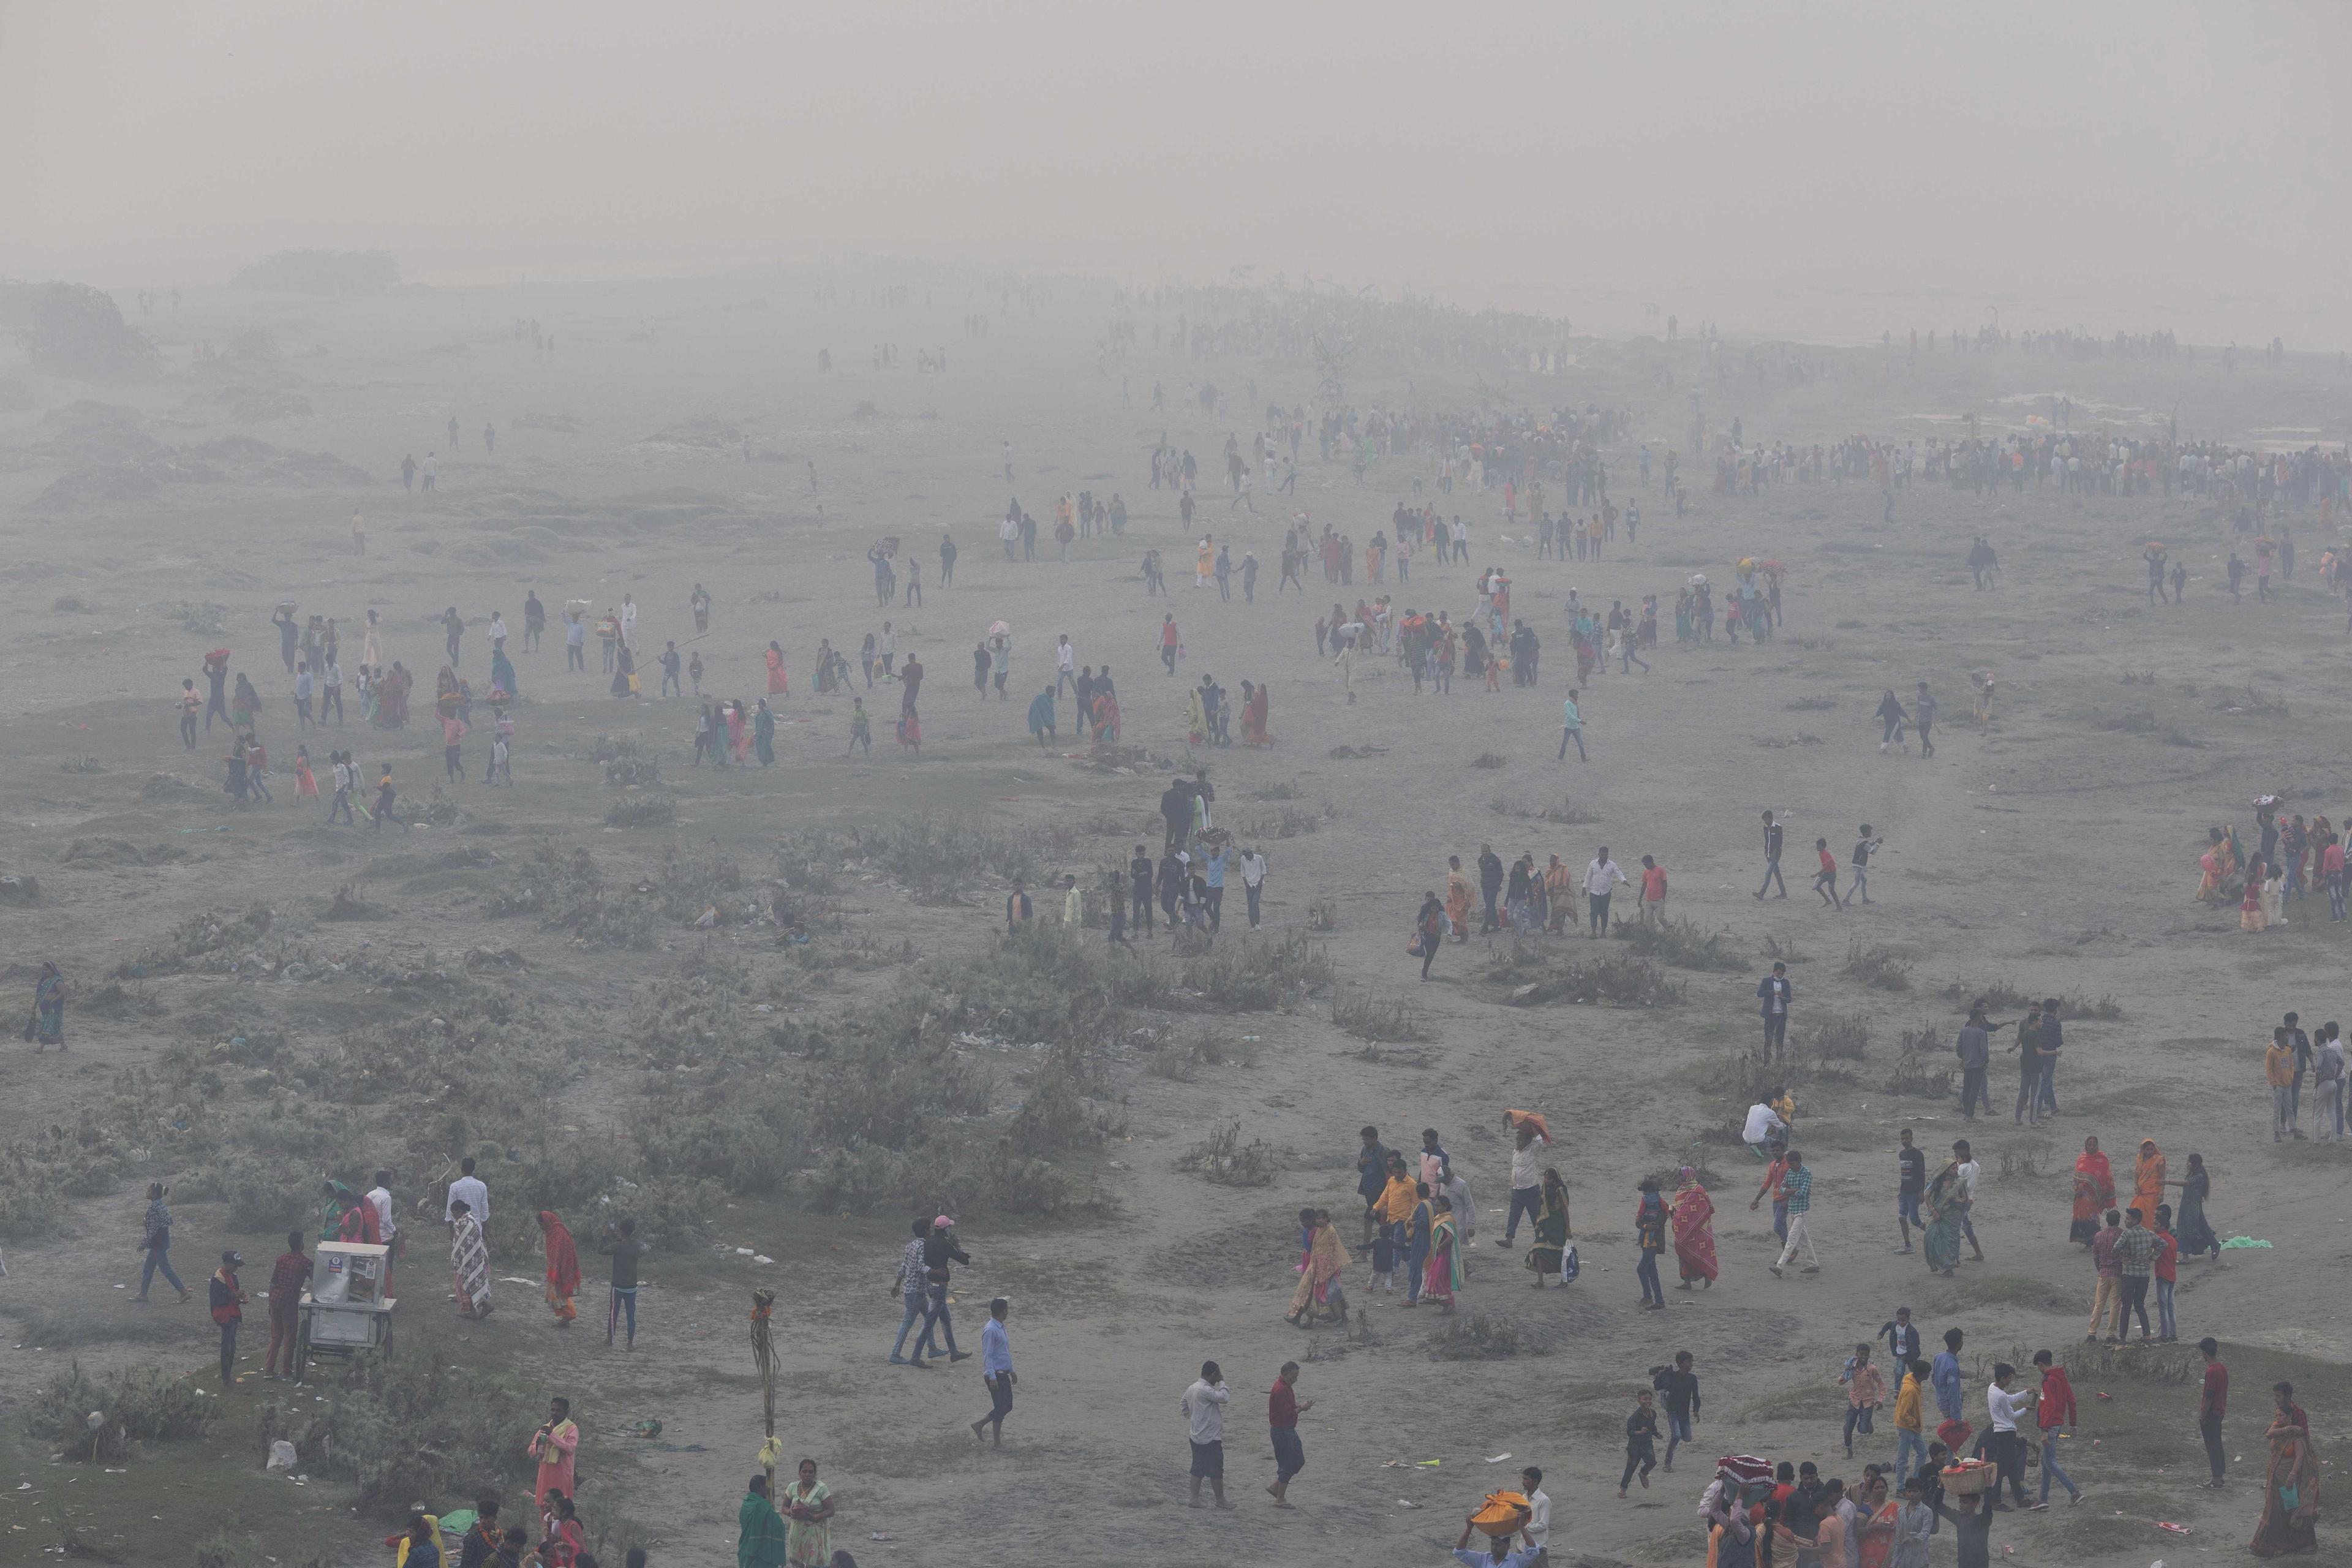 Hindu devotees gather on the bank of the Yamuna river in New Delhi, India, Oct 31. Photo: Reuters